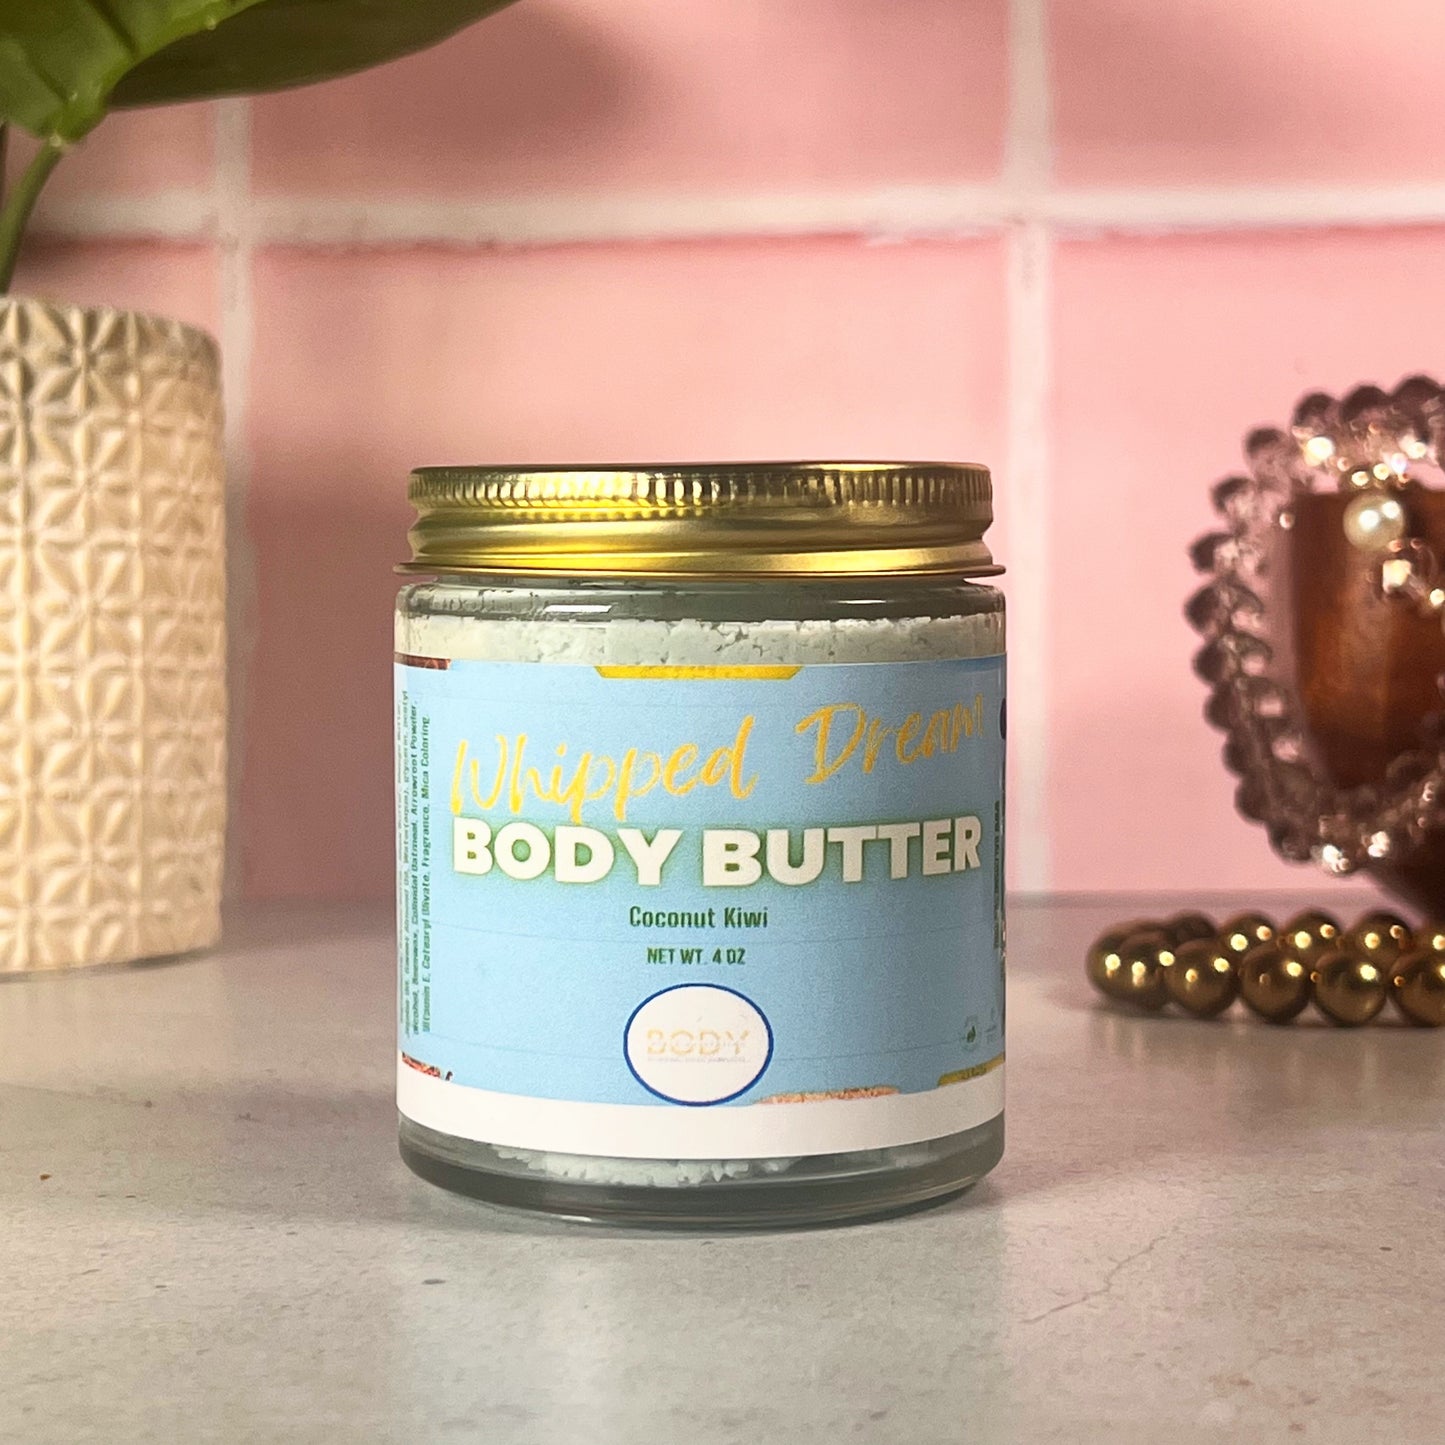 Whipped Body Butter "Coconut Kiwi"